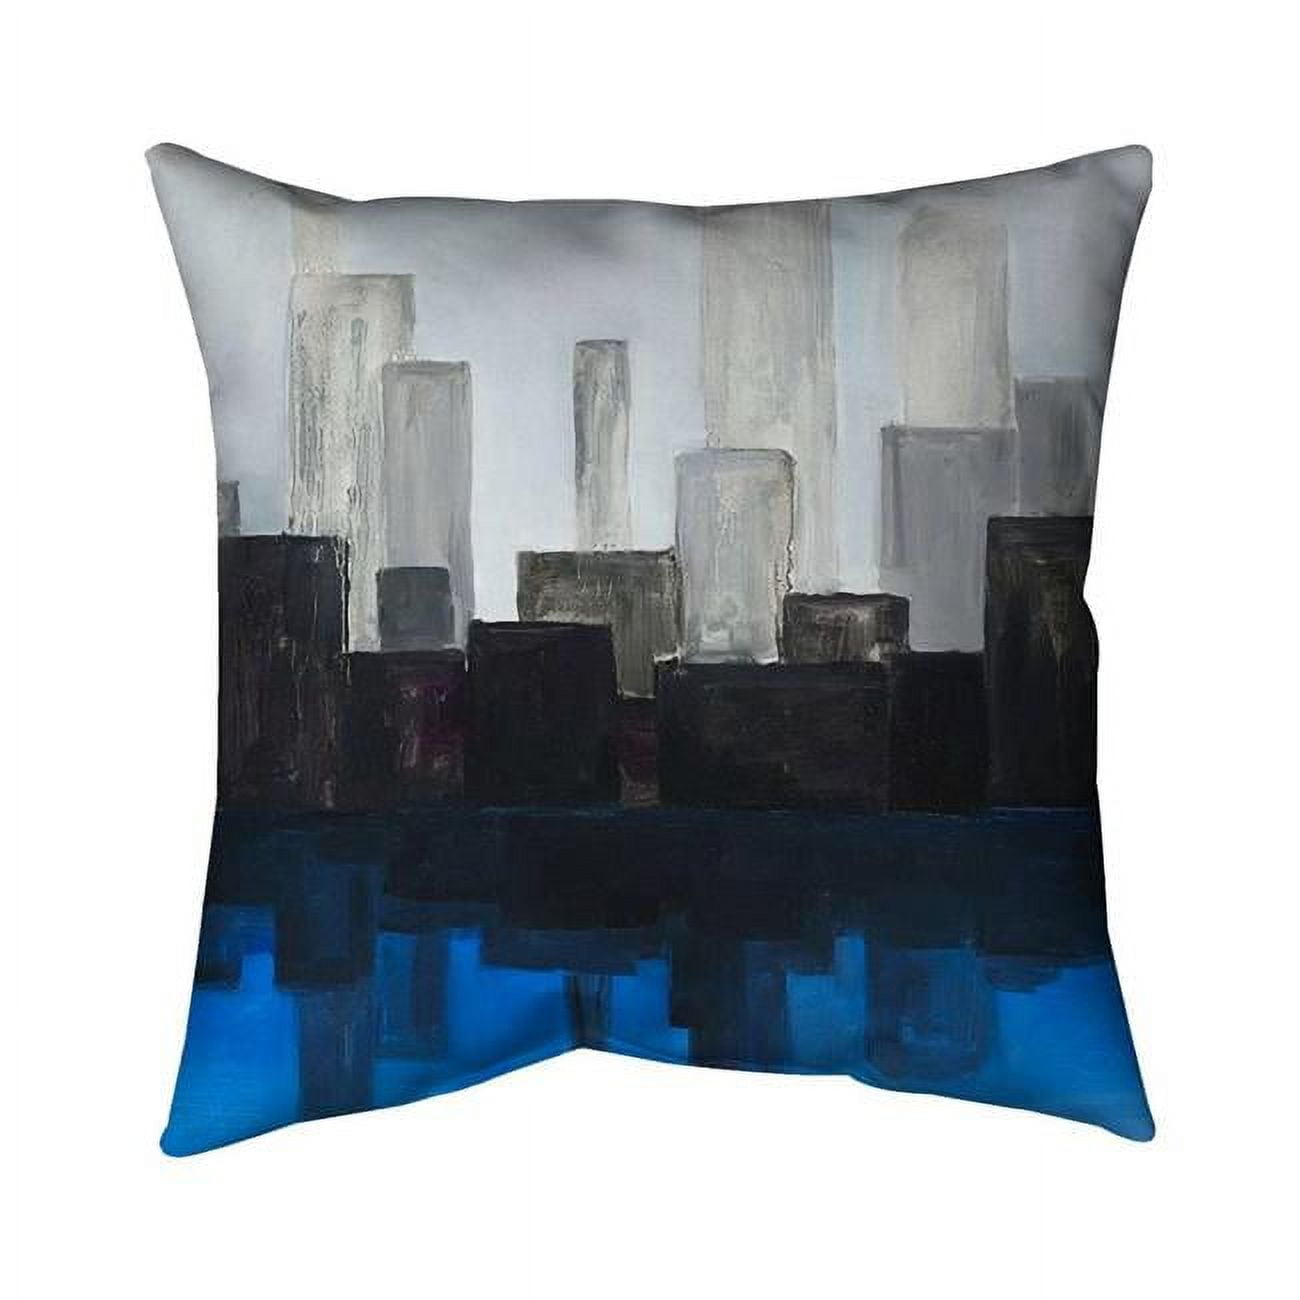 Begin Home Decor 5543-2626-CI337 26 x 26 in. Blue City-Double Sided Print Indoor Pillow Cover